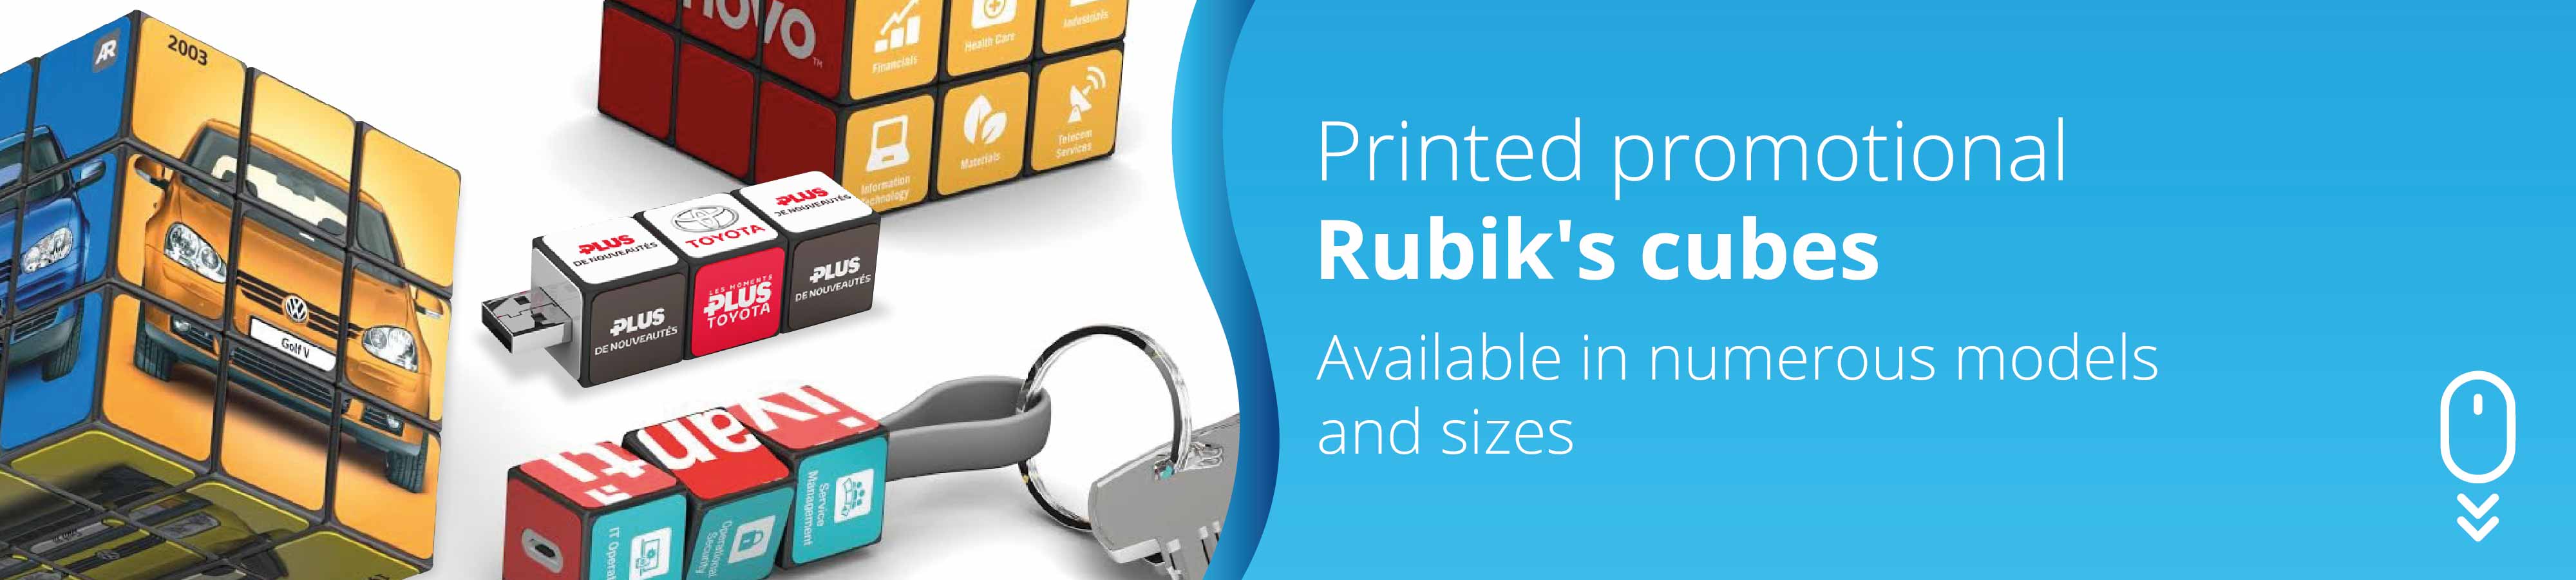 Printed-promotional-Rubiks-cubes8q6XVUkFZ9GlO